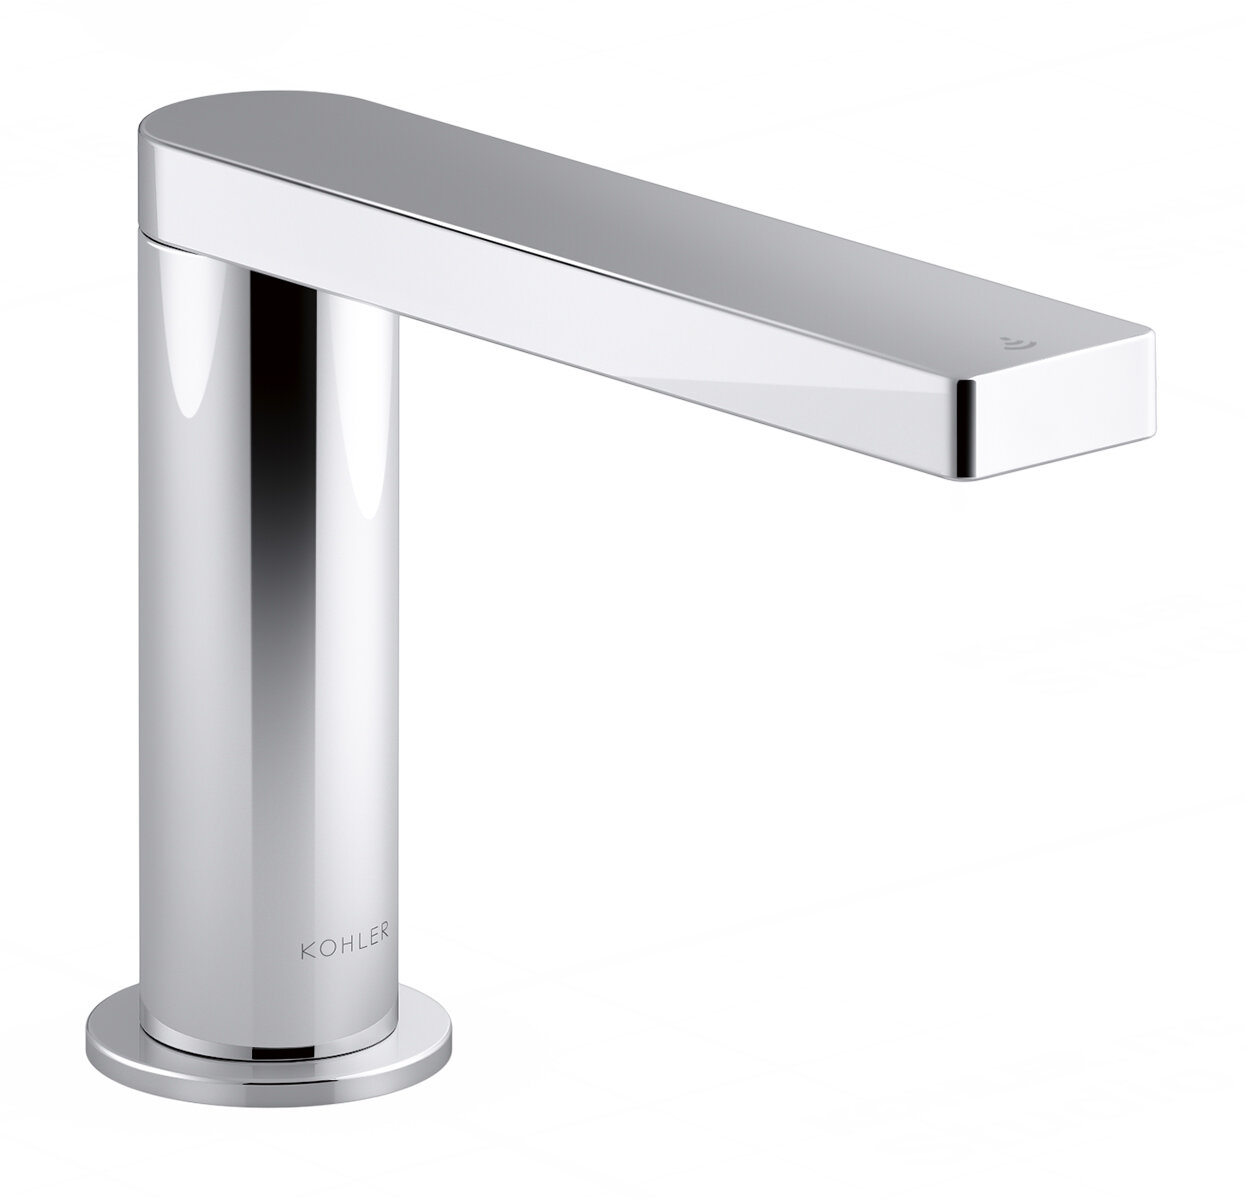 Kohler Composed Touchless Bathroom Sink Faucet With Kinesis Sensor Technology